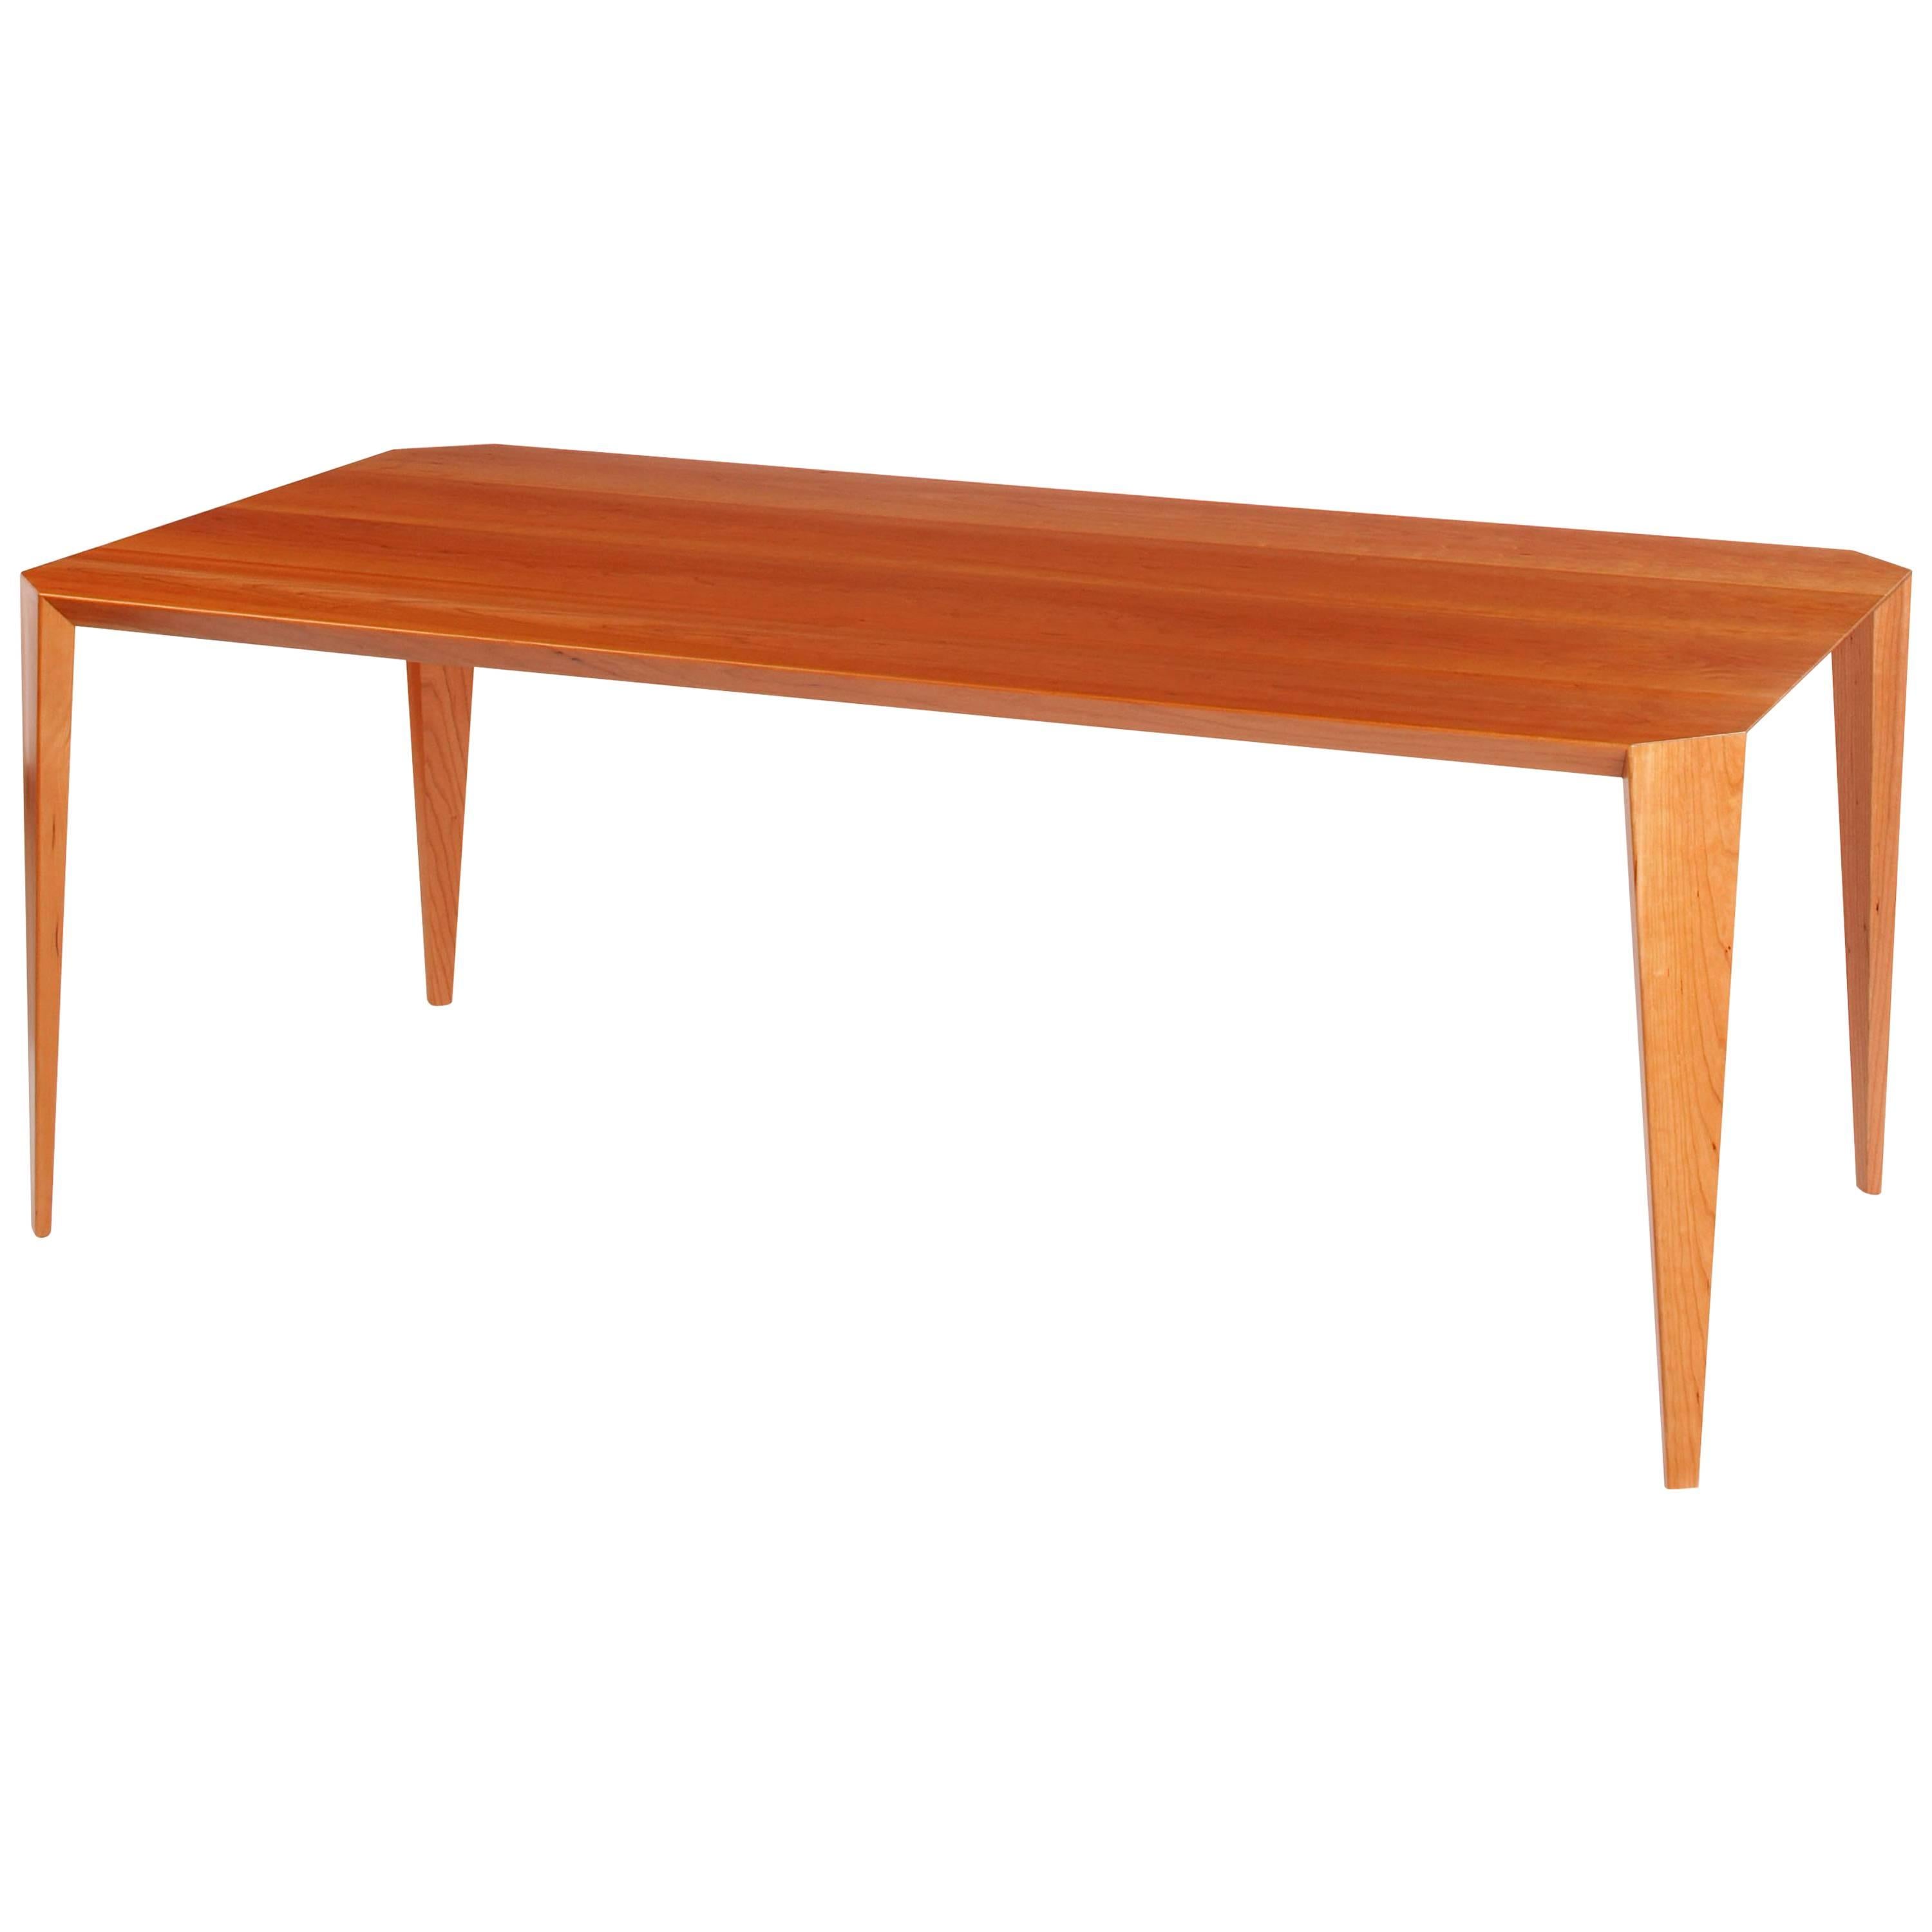 Angela Adams Origami Dining Table in Cherry, Seats Six, Handcrafted, Modern For Sale